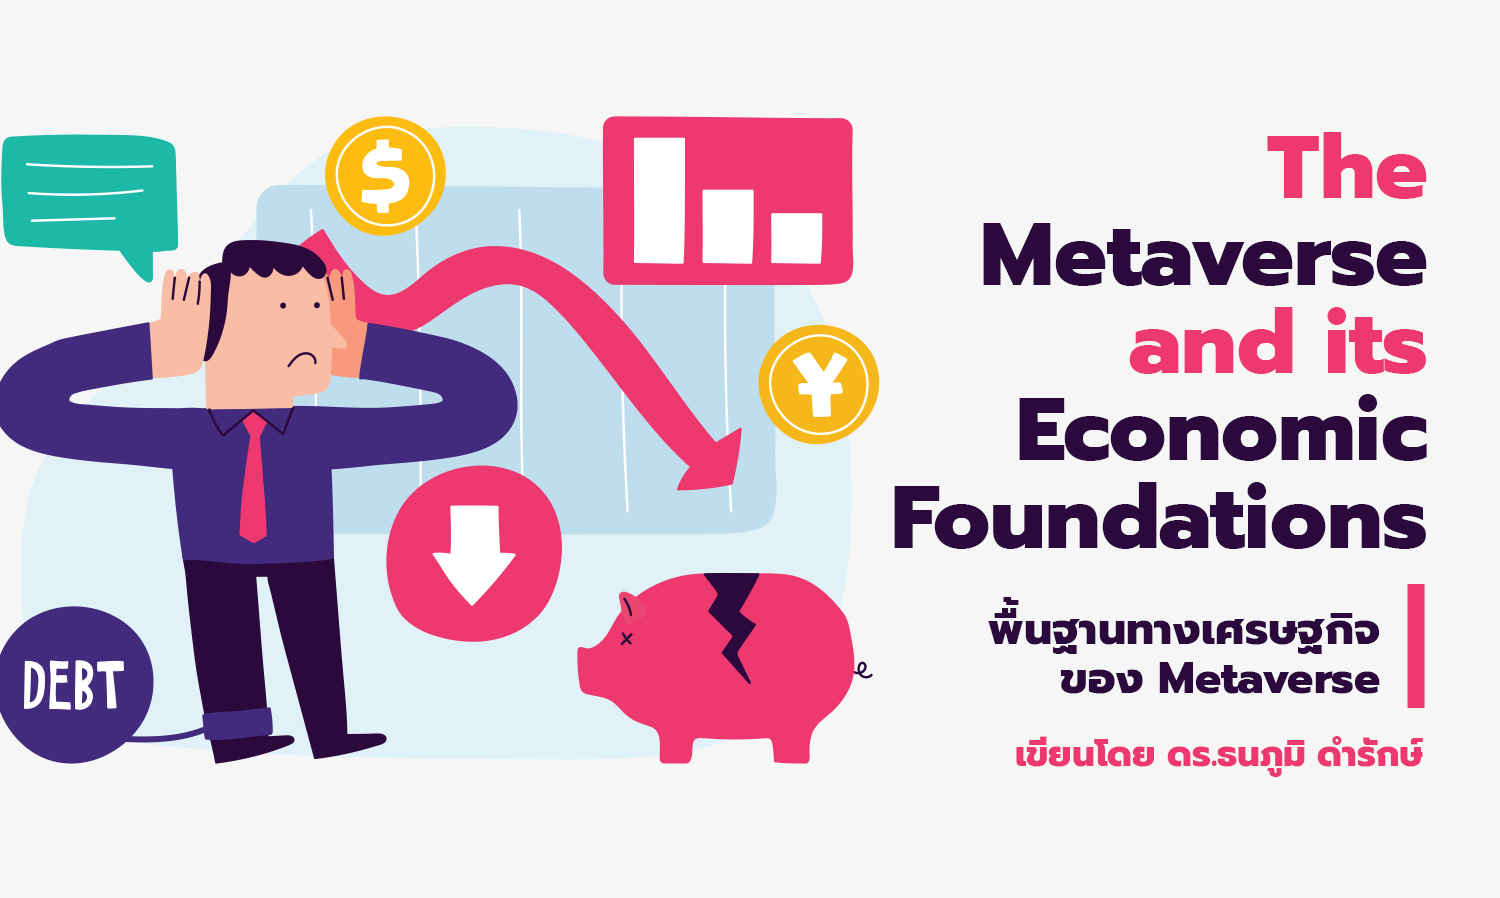 The Metaverse and its Economic Foundations